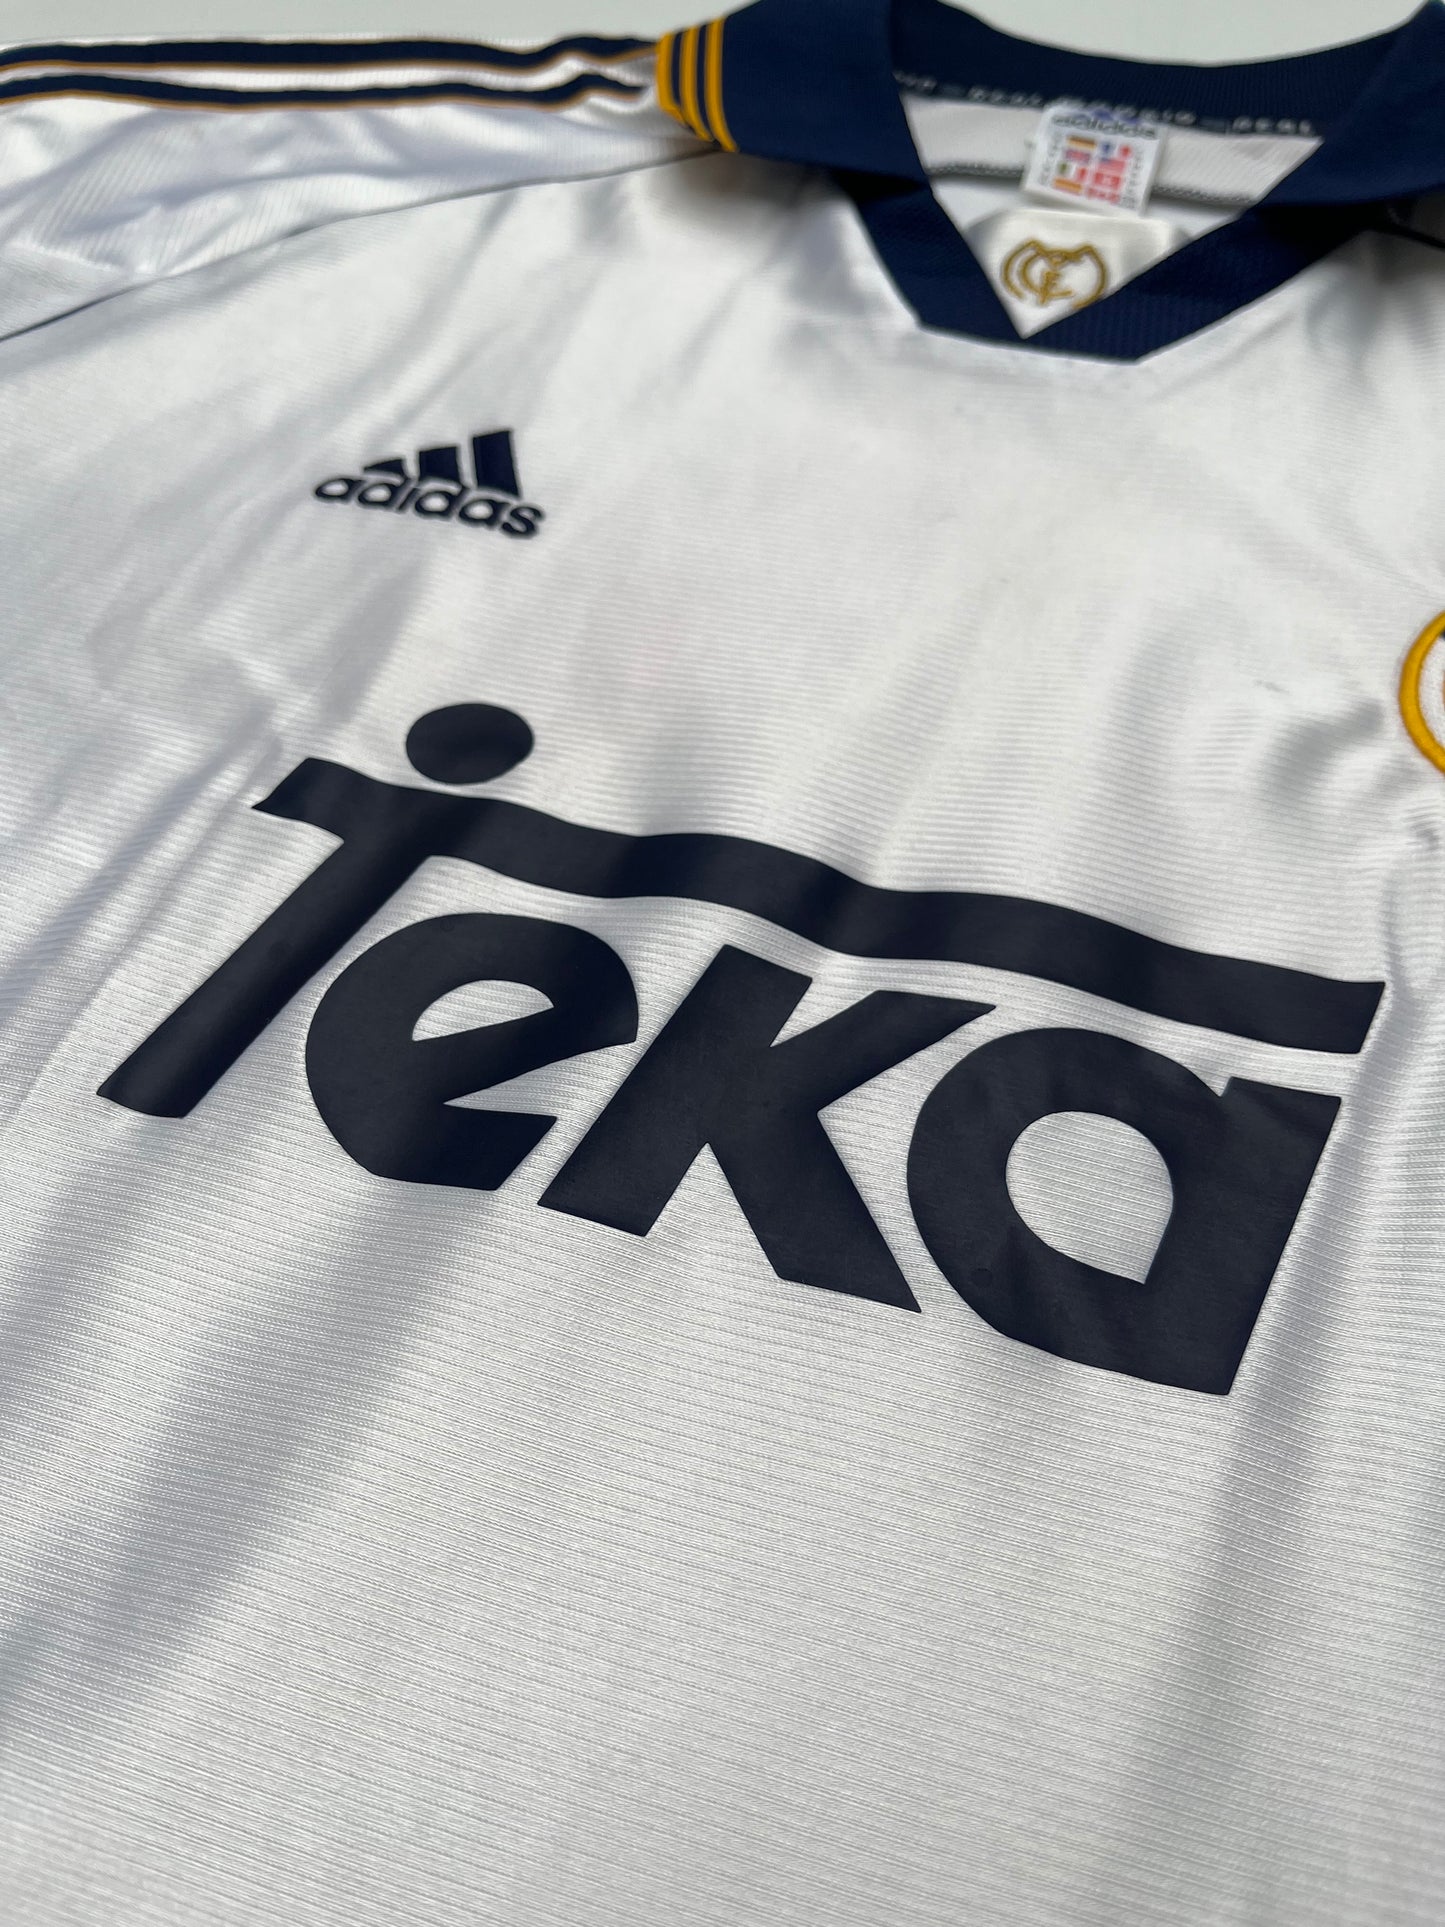 Jersey Real Madrid Local 1999 2000 (XL)